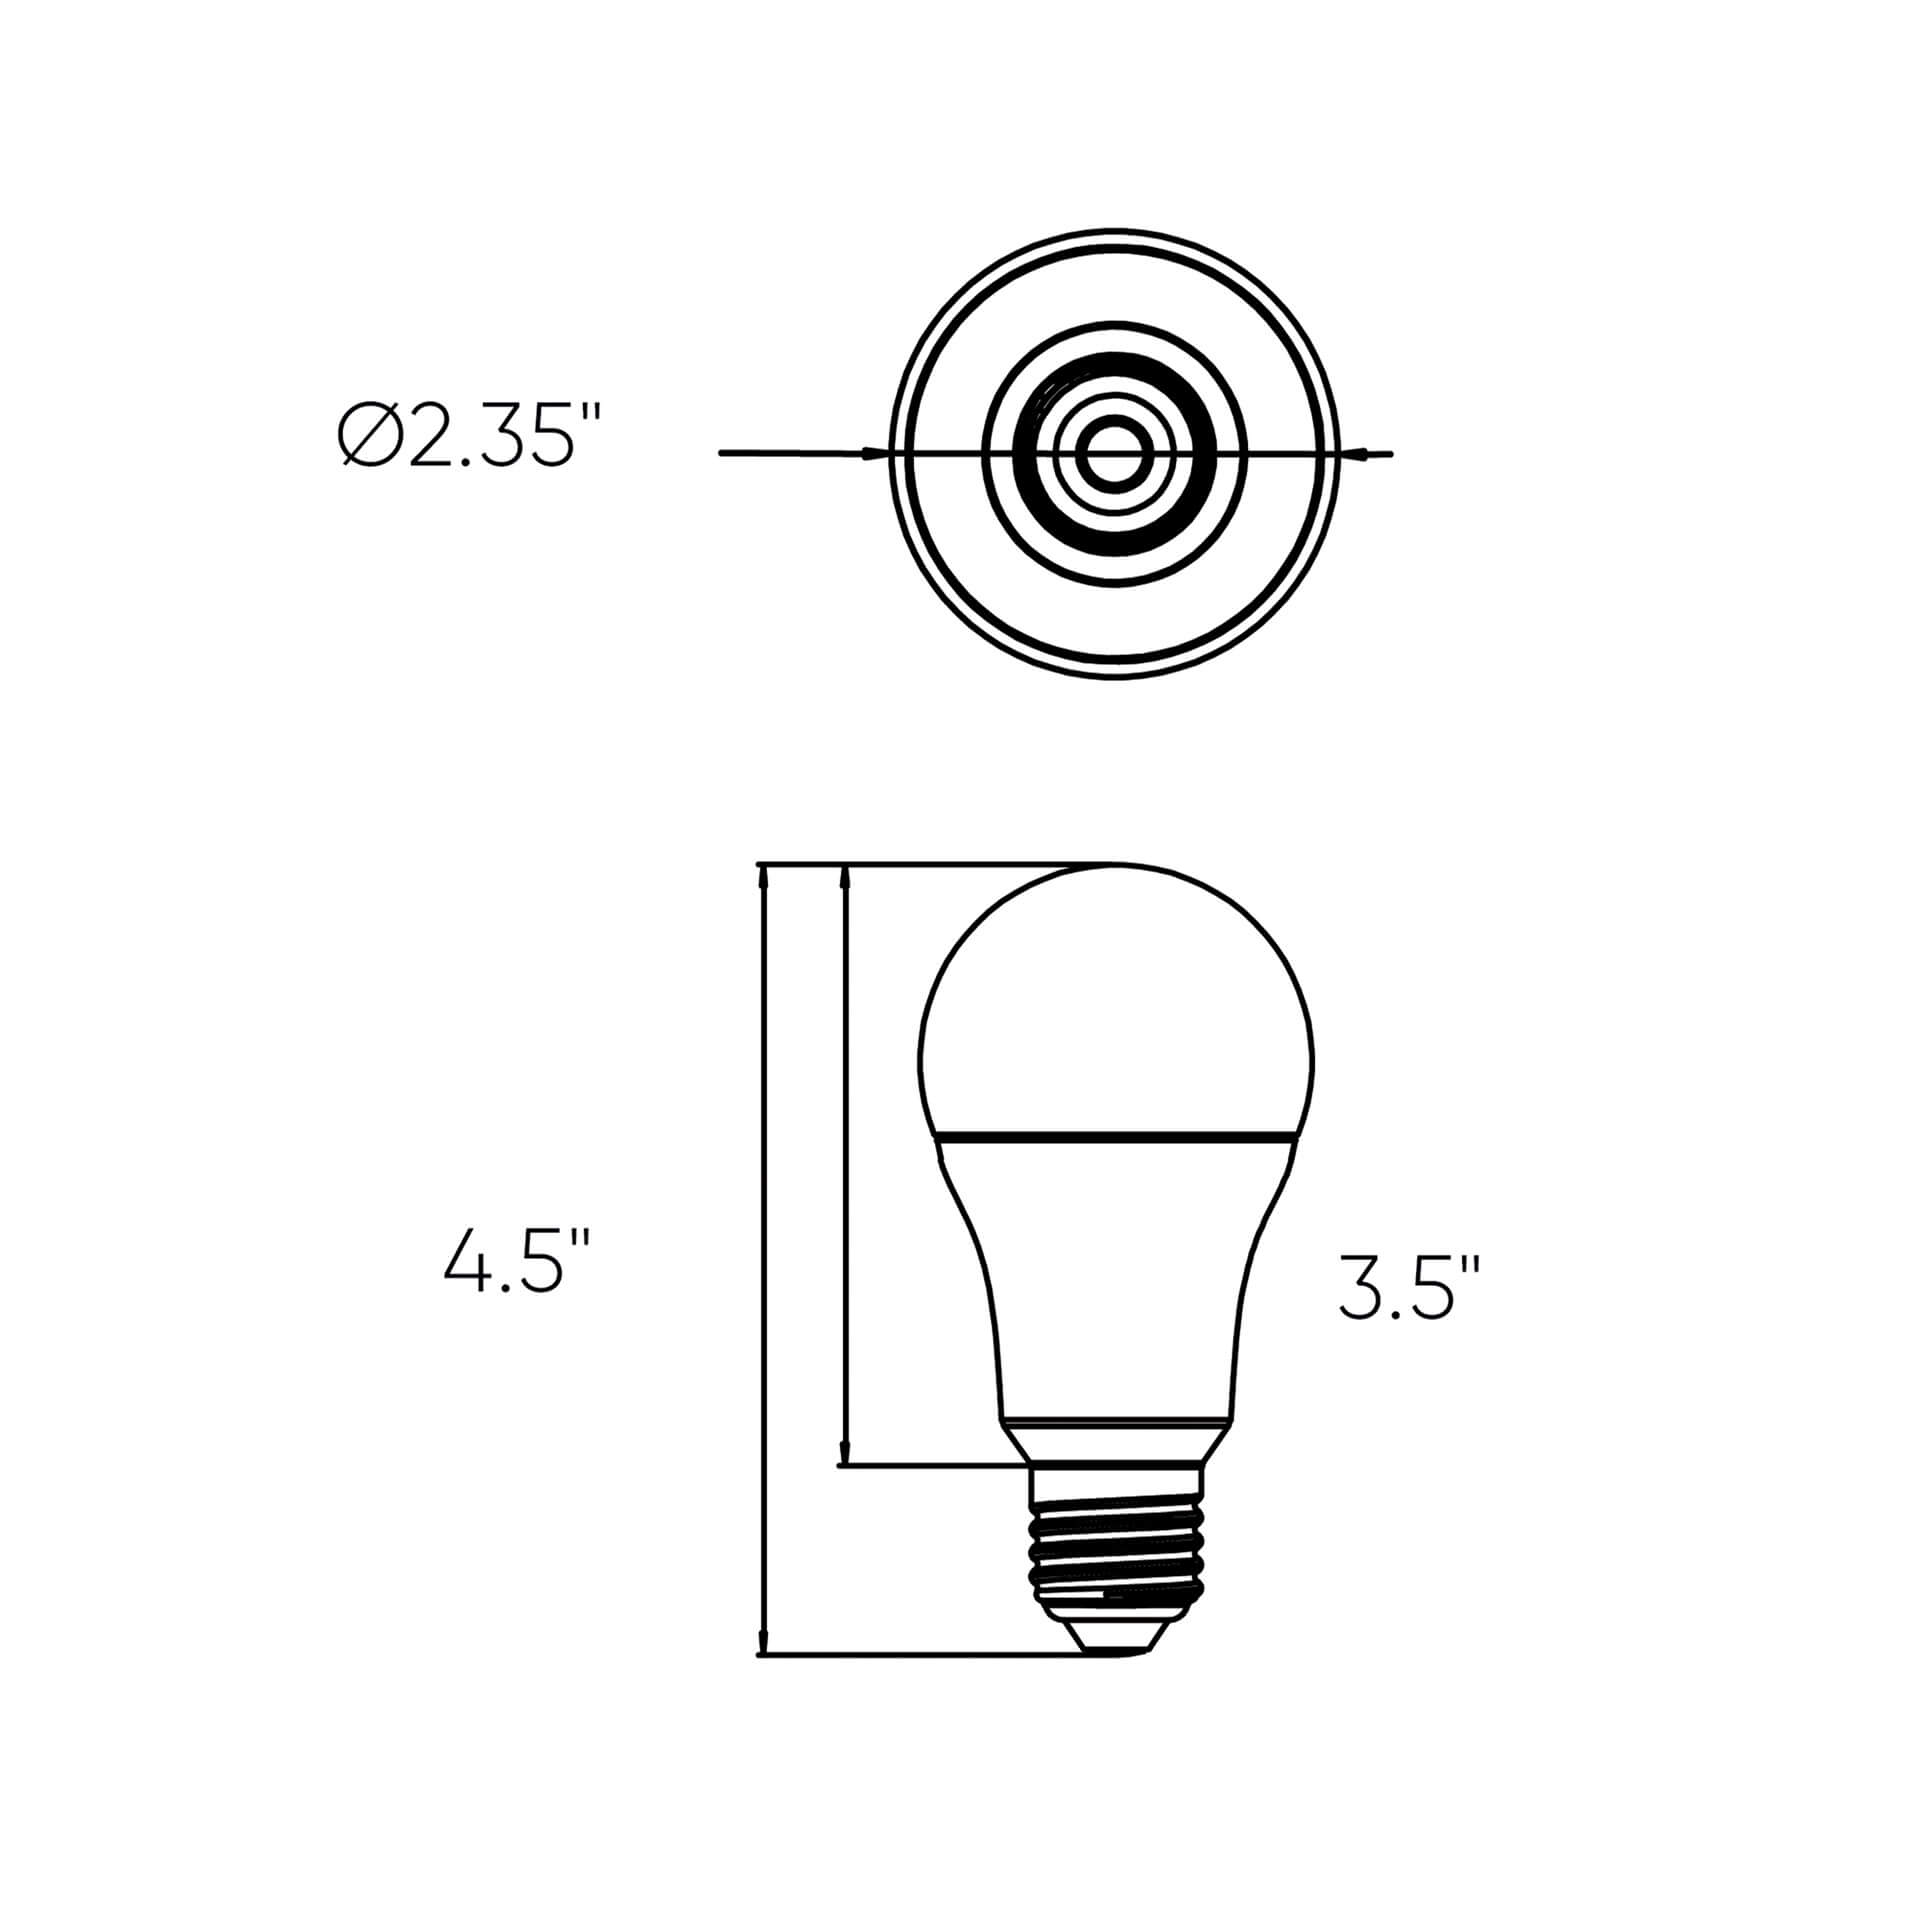 Smart A19 RGB+CCT Light Bulb Specification Banner